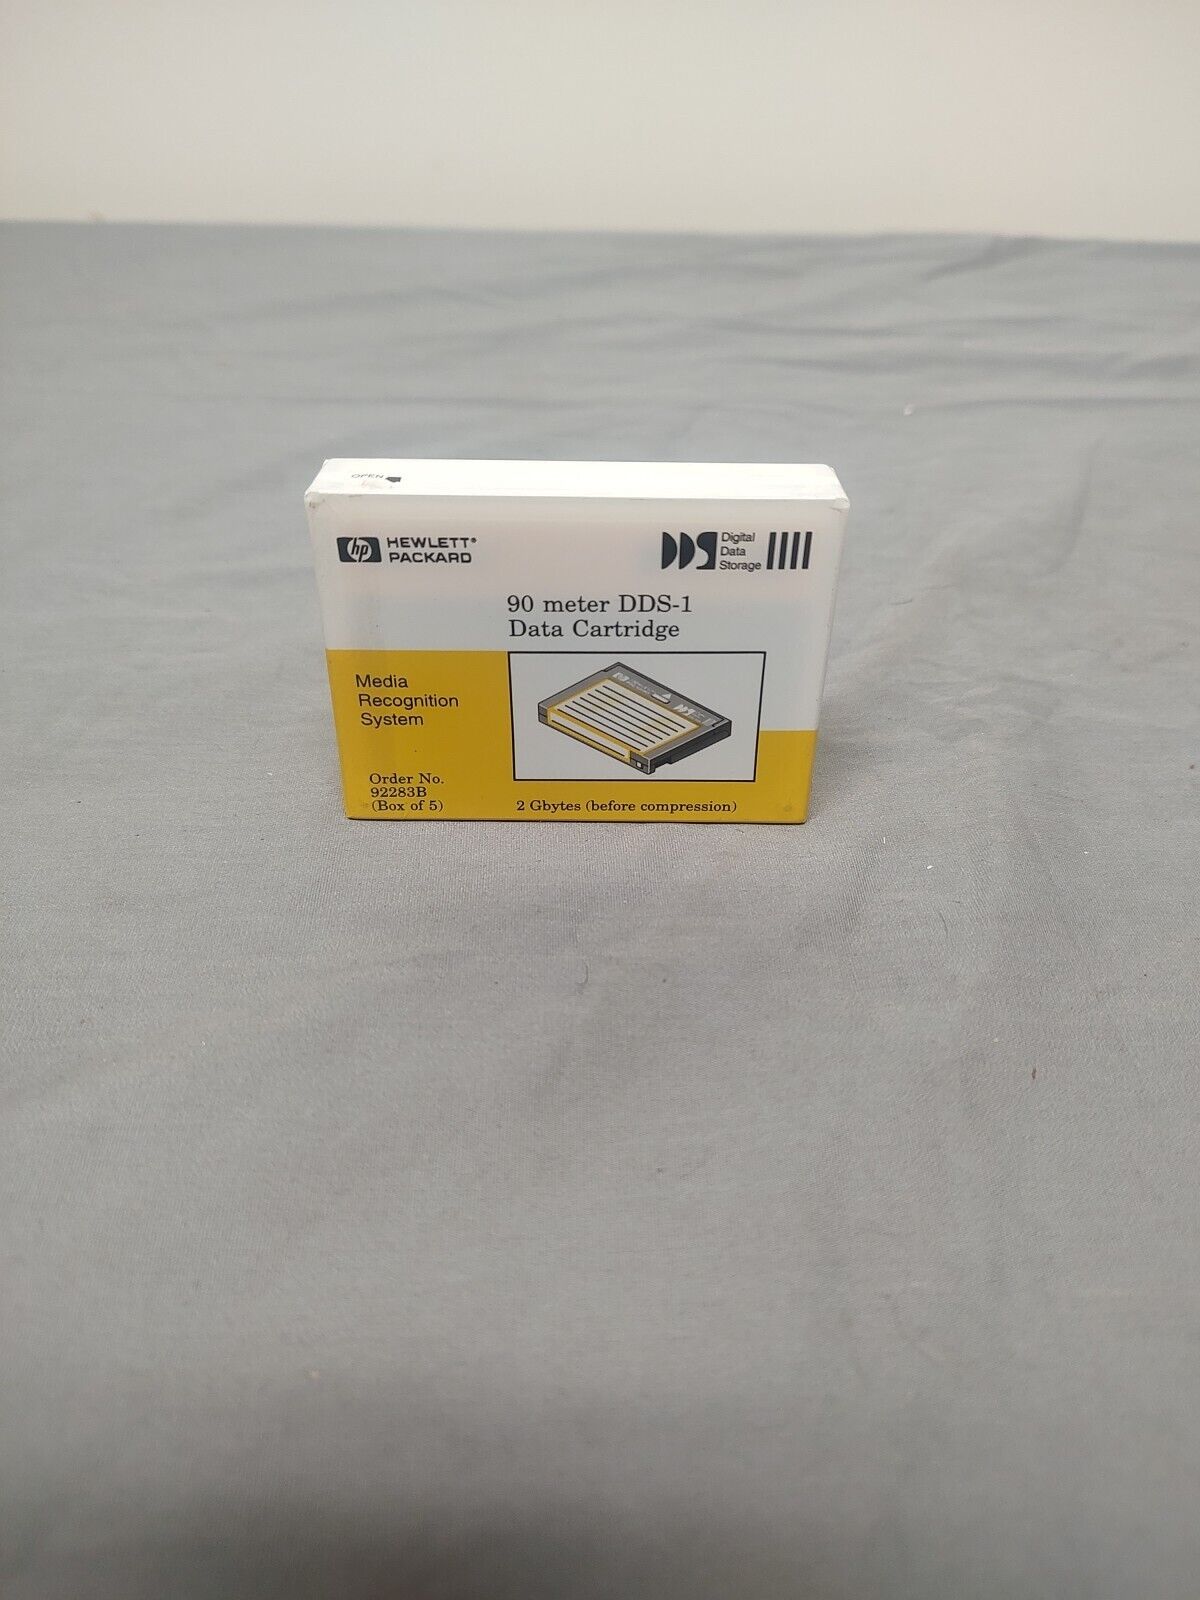 New Sealed HP DDS-1 90 METER 2Gb Media Recognition System 